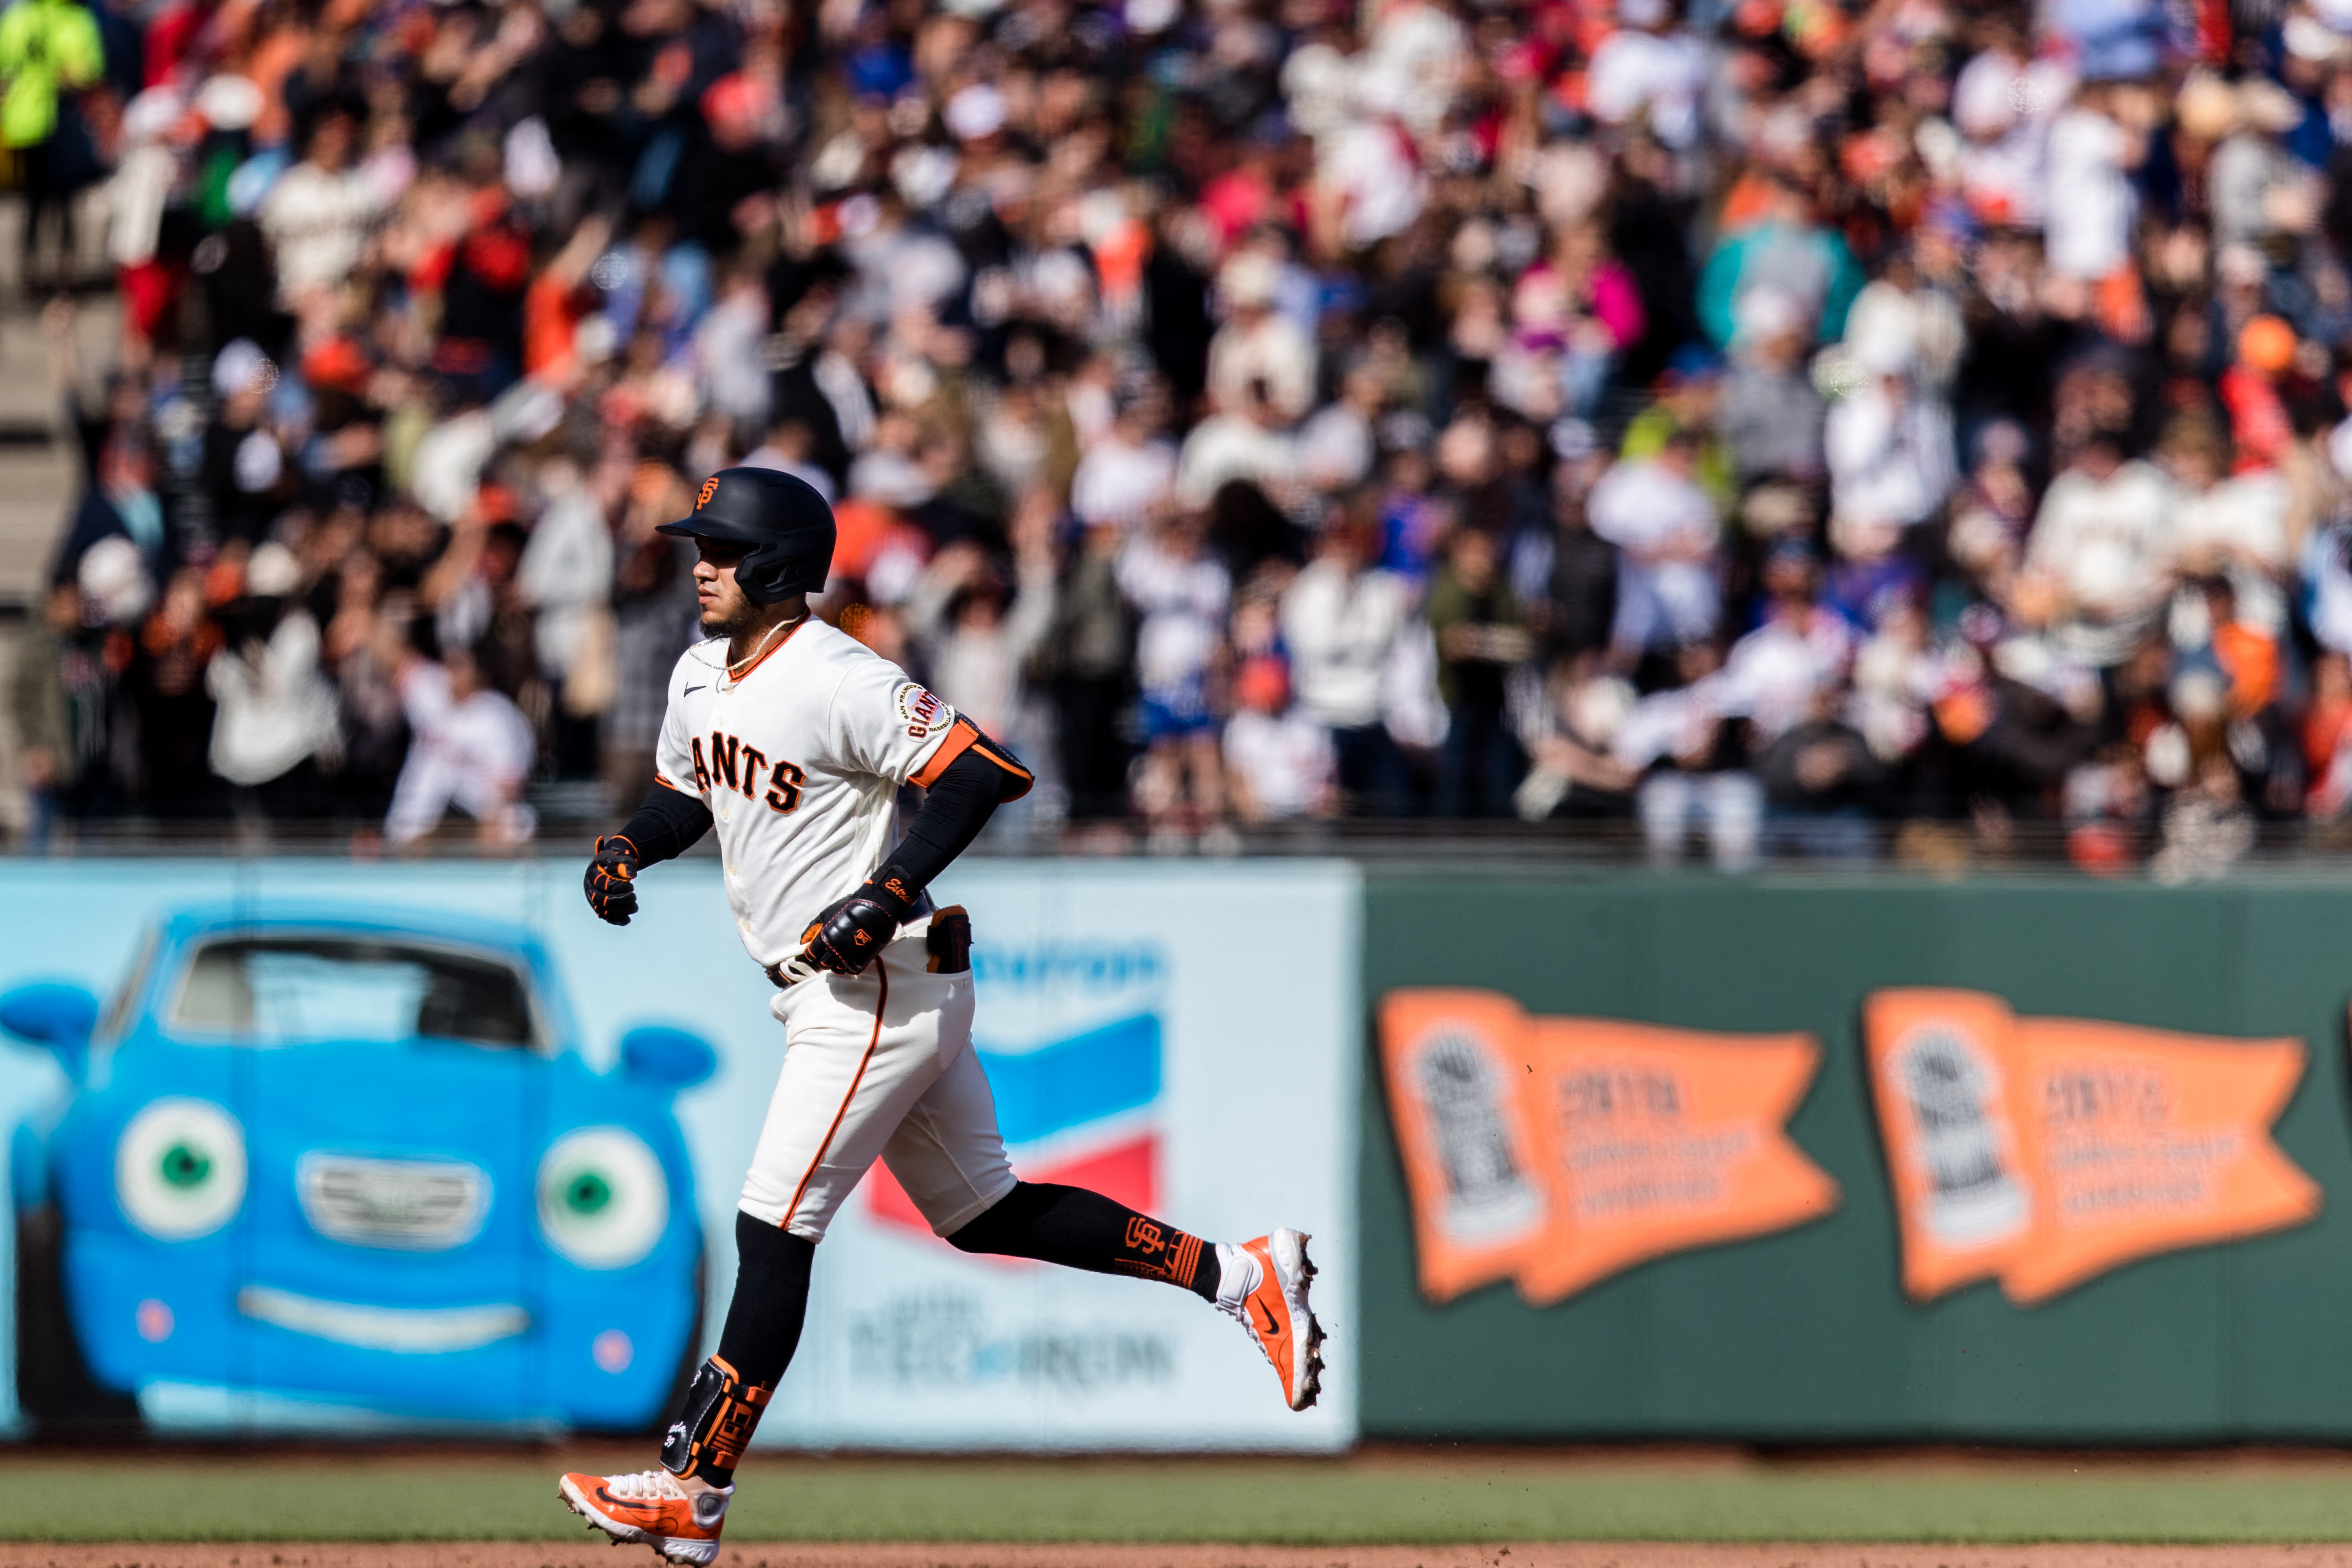 Giants' second straight win earns series split with Mets